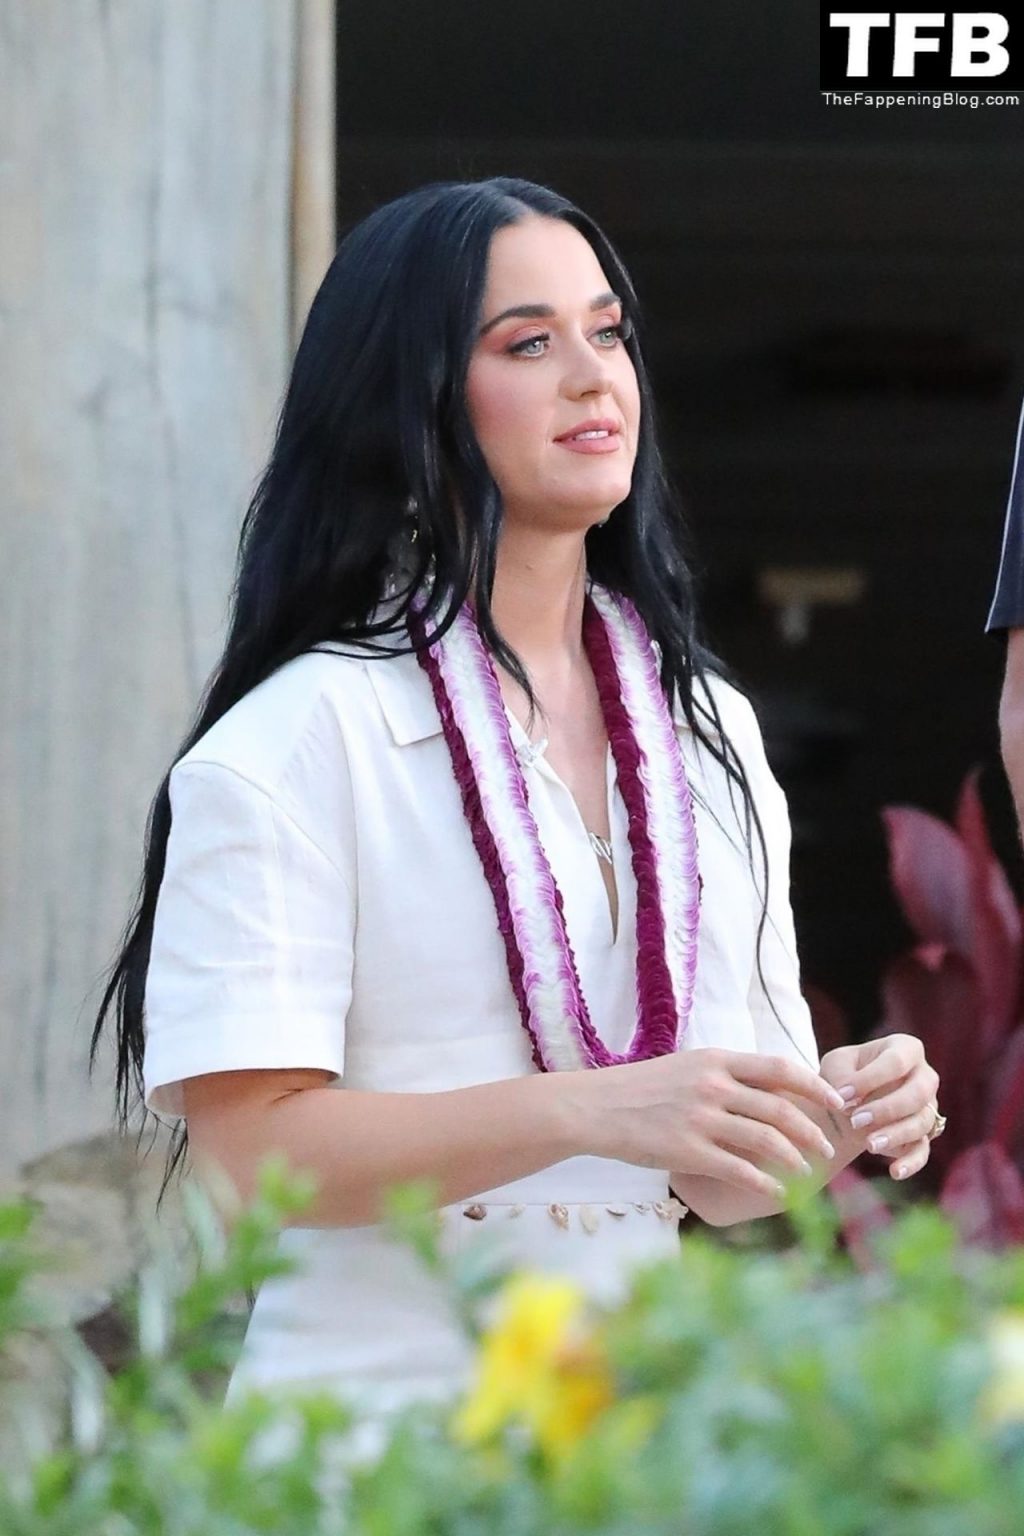 Katy Perry Tits The Fappening Blog 56 1024x1536 - Katy Perry Shows Her Underboob Filming a New Season of American Idol in Maui (70 Photos)